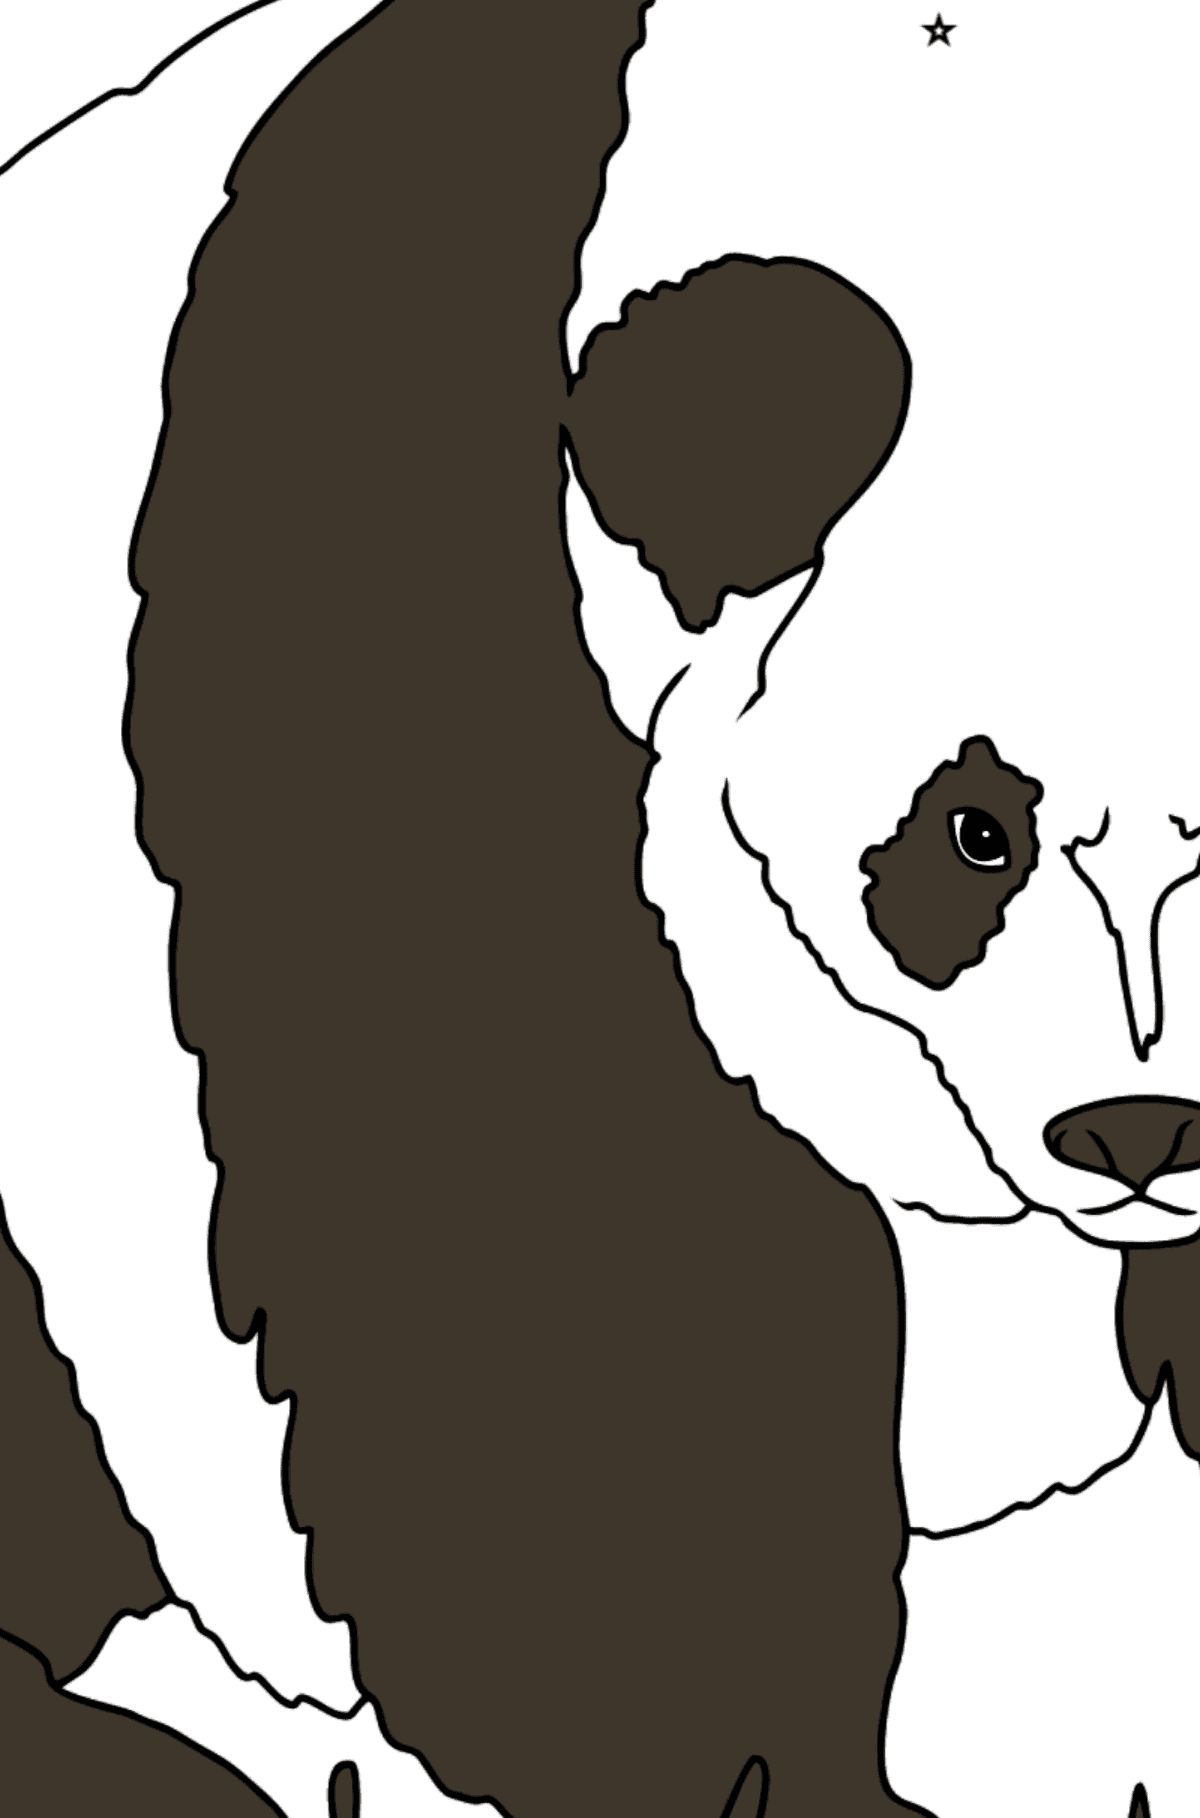 Coloring Page - A Panda is Standing - Coloring by Geometric Shapes for Kids